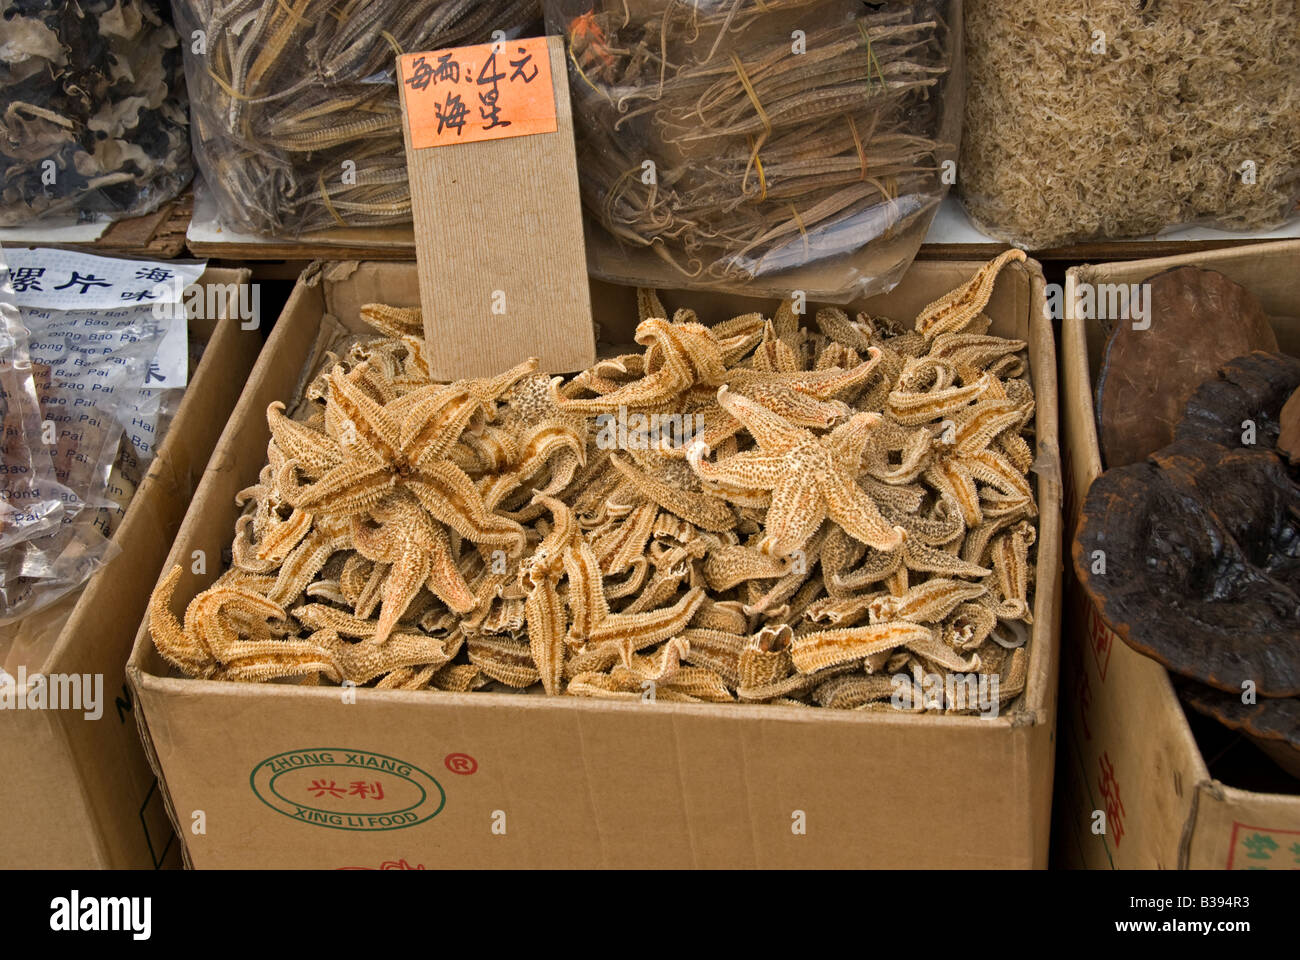 Dried starfish for sale in Chinese herbal medicine market. Hong Kong China Stock Photo